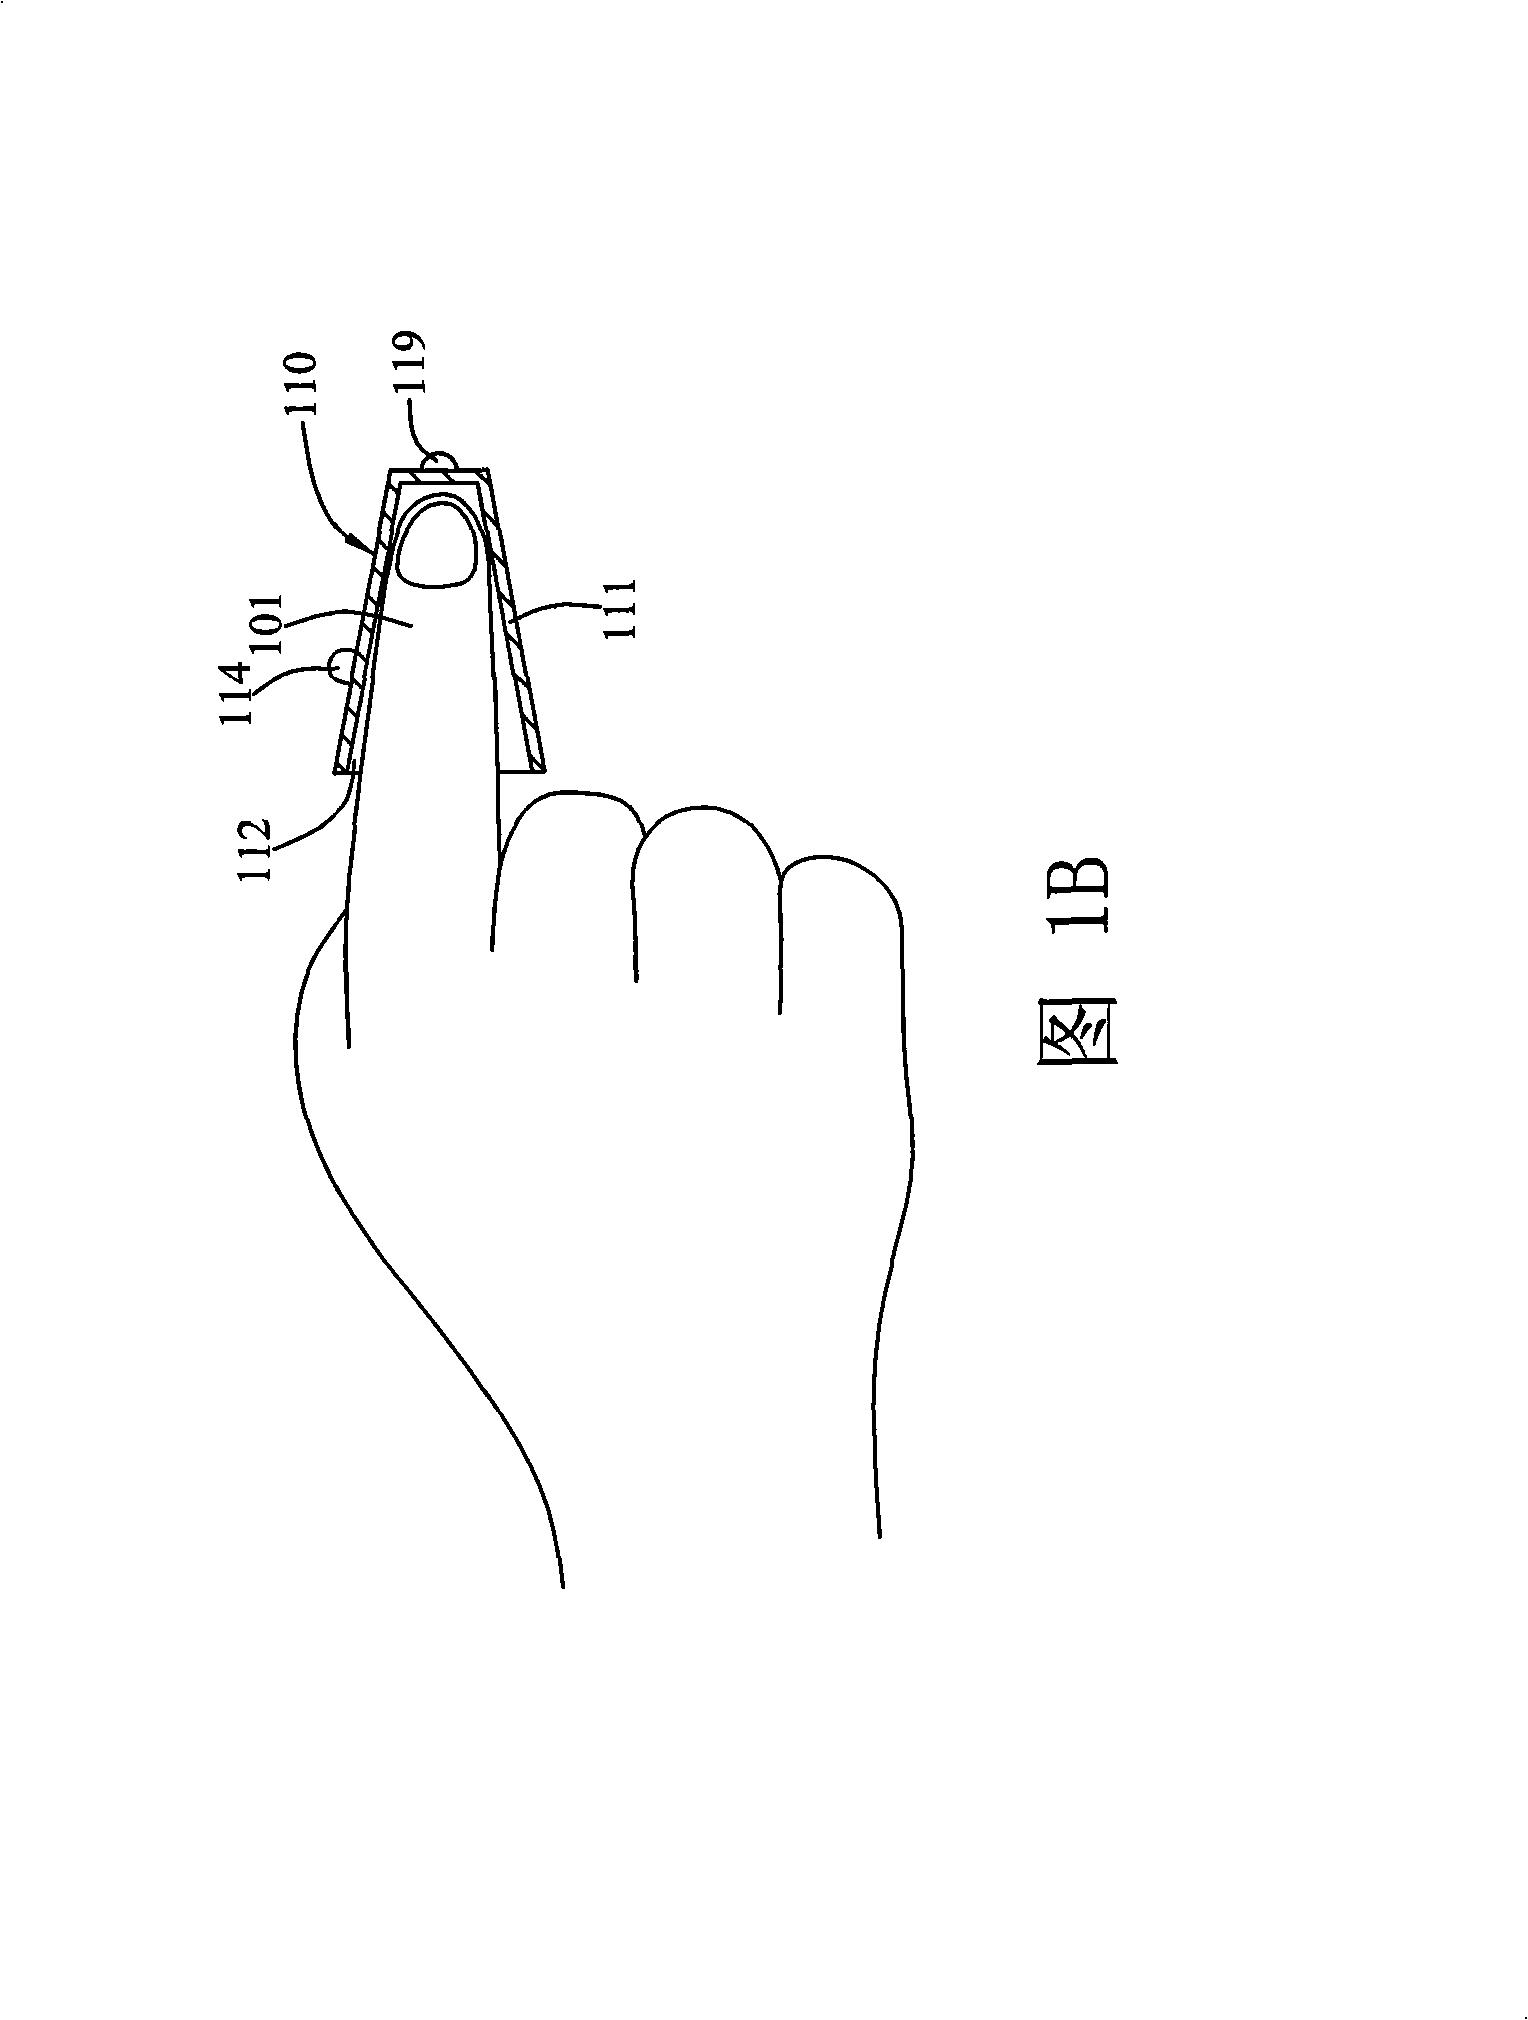 Non-contact type finger operation and control system and its method